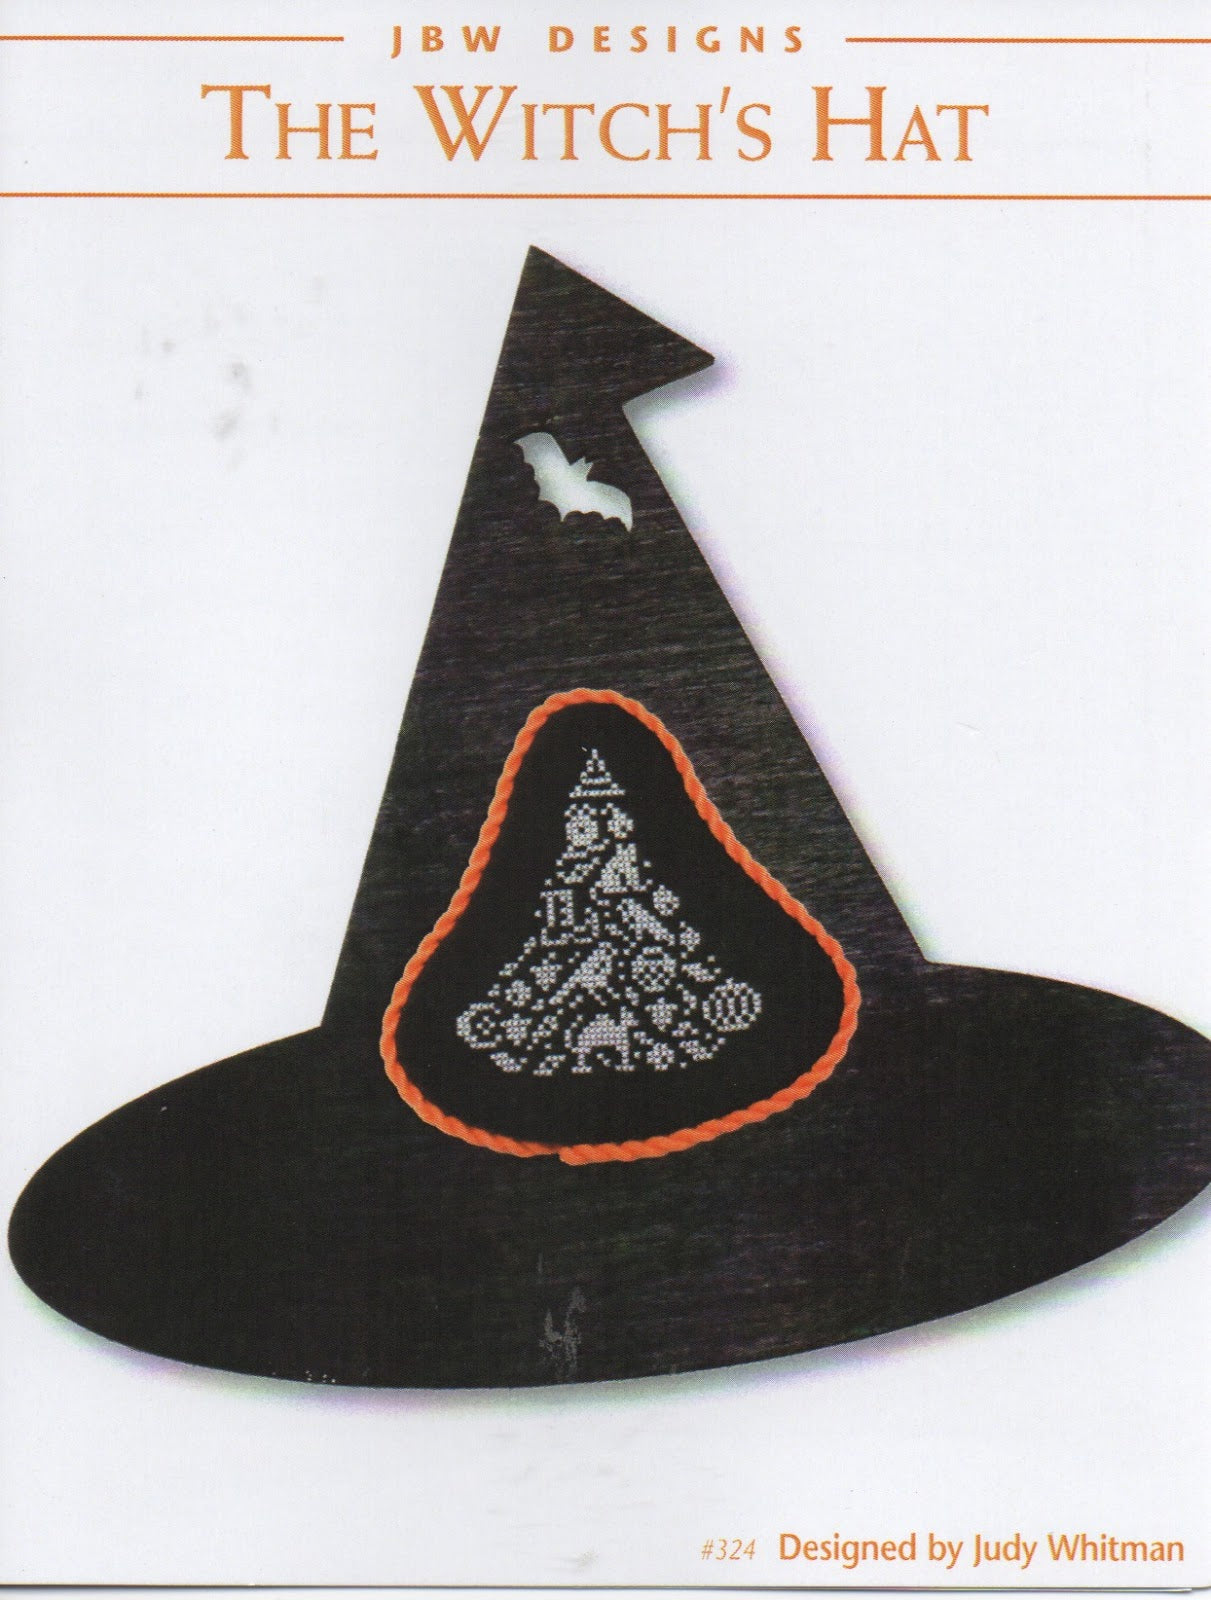 JBWD - The Witches Hat